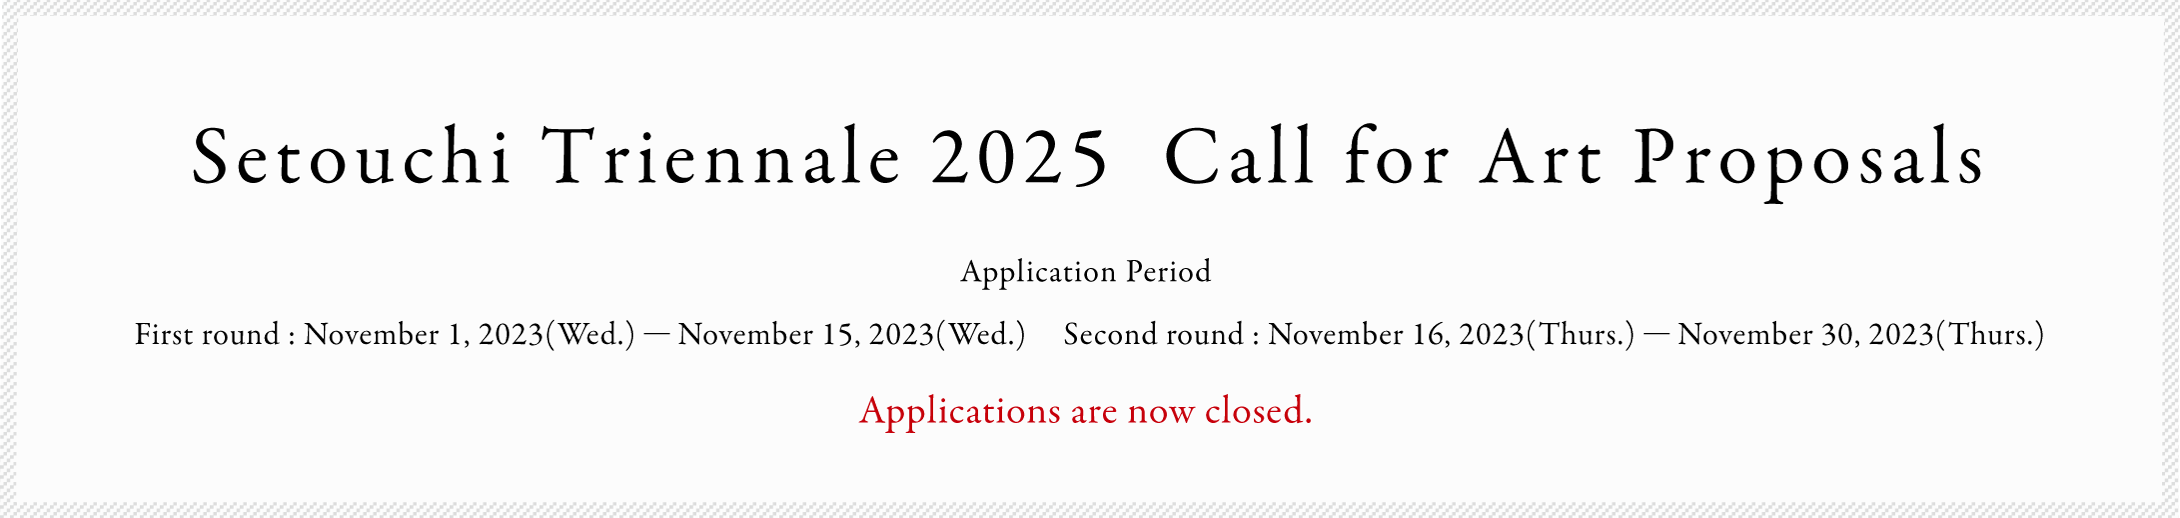 Setouchi Triennale 2025 Call for Art Proposals Application Period Part 1 : November 1(Wed),2023 - November 15 (Wed),2023 Part 2 : November 16(Thu),2023 - November 30(Thu),2023